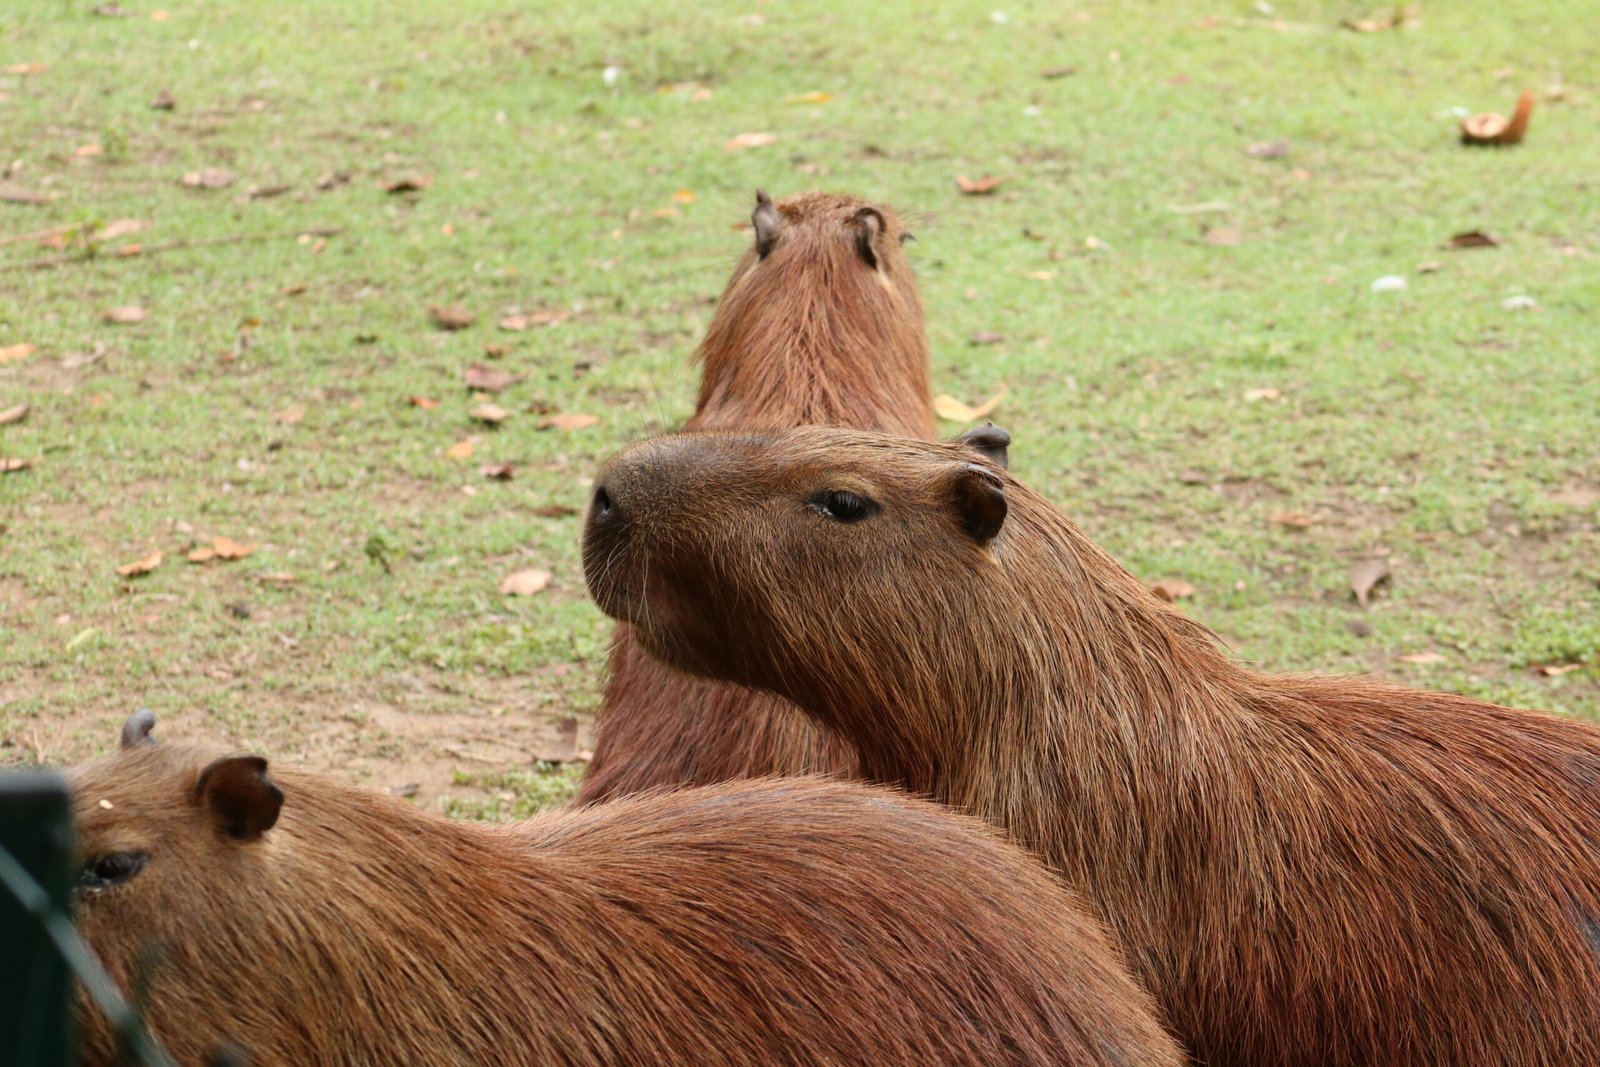 Where to Find the Closest Capybara in Your Area